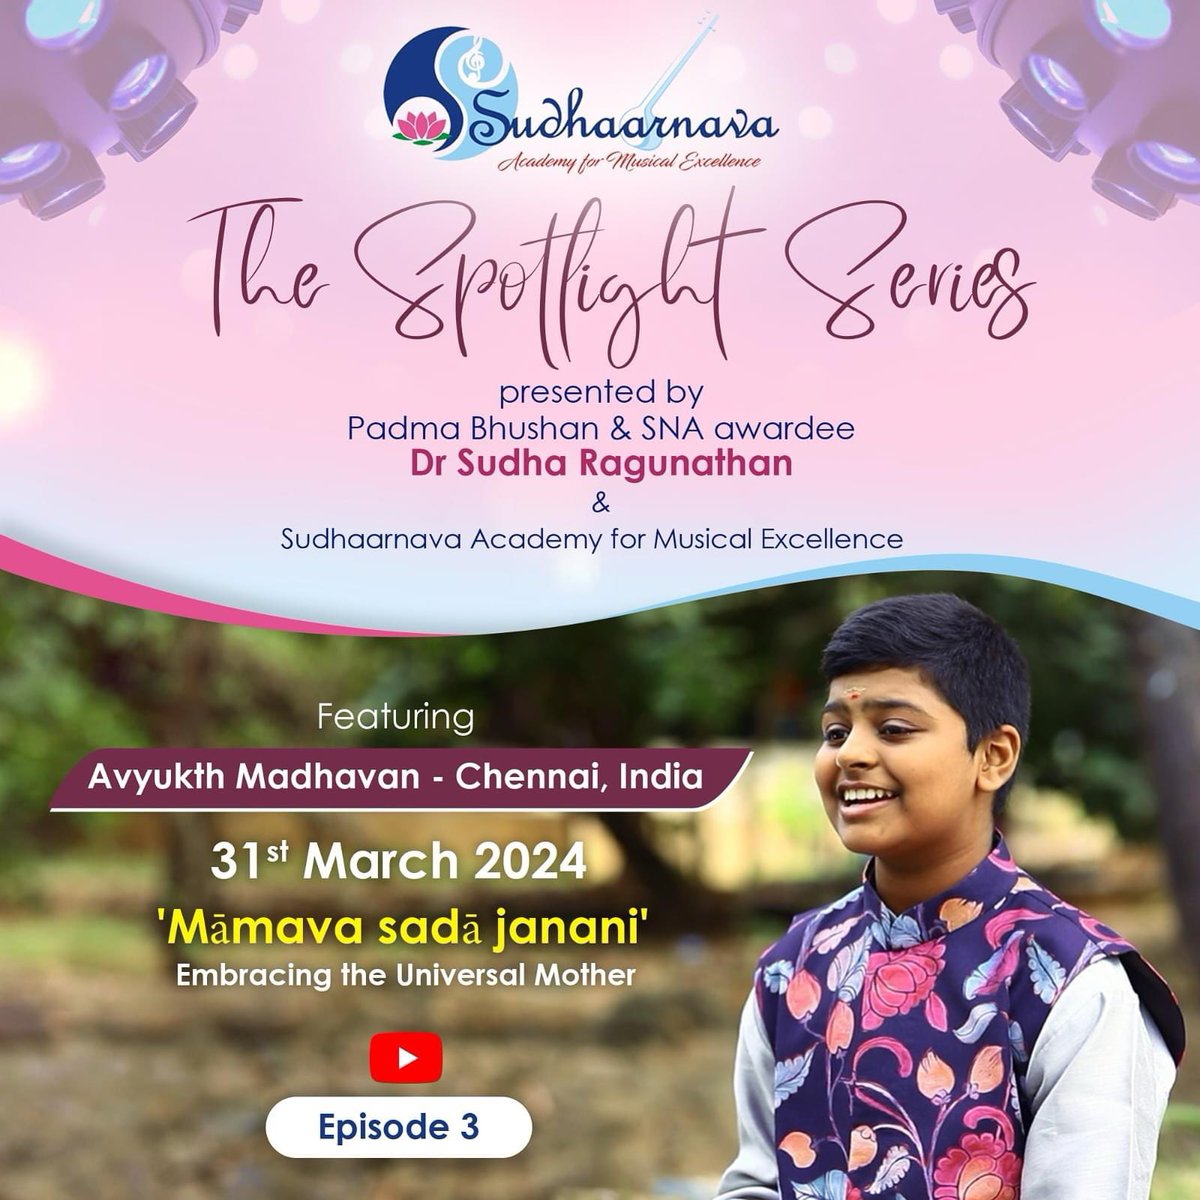 Just released on my YouTube channel SimplySudha….Spotlight Episode 3! Listen to Avyukth Madhavan and encourage this youngster! #Spotlight #sudharaghunathan #sudharagunathan #youngminds #youngtalent #swatitirunal #Swathitirunal #mamavasada